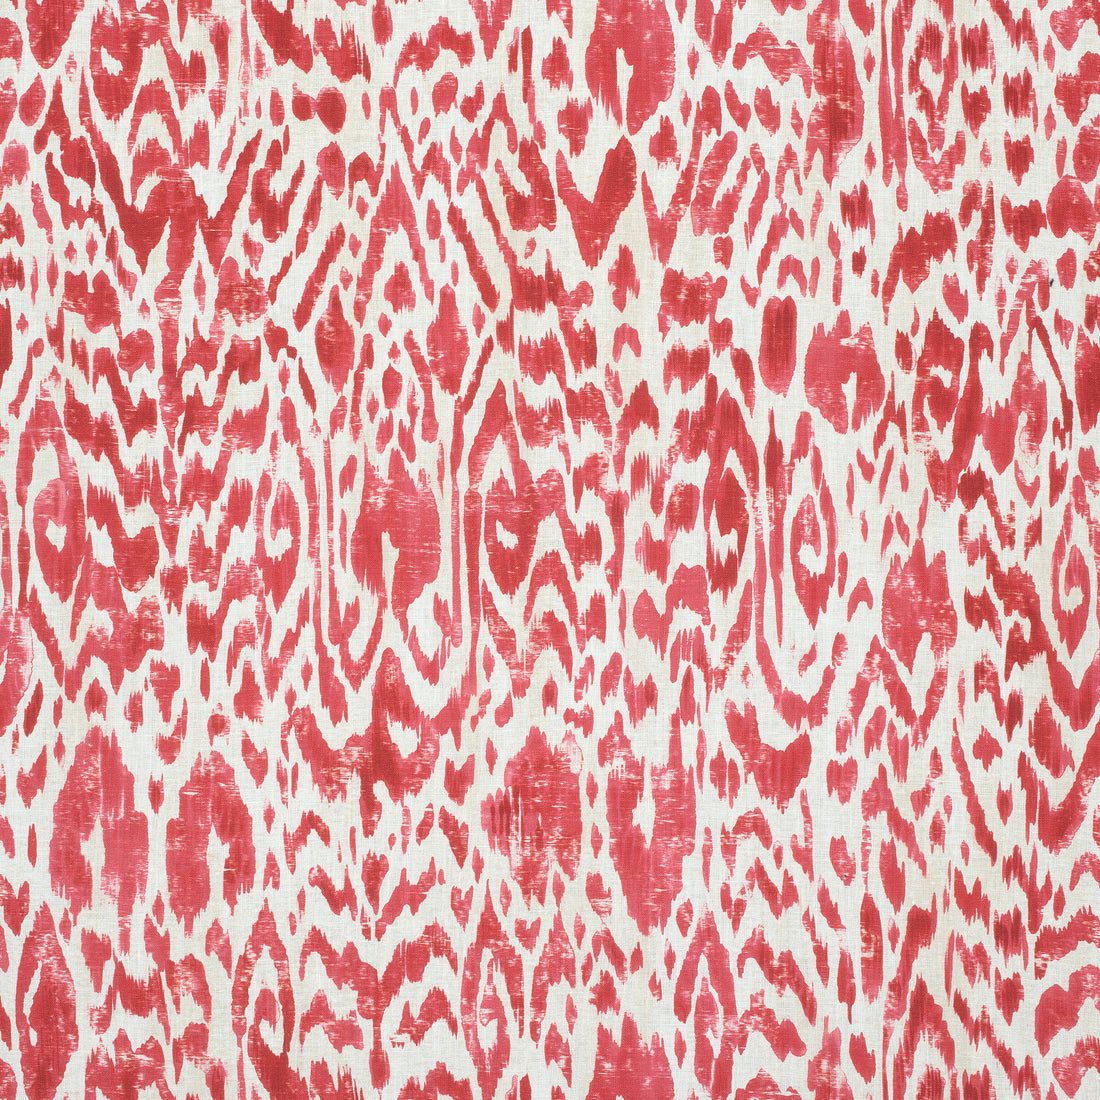 Carlotta fabric in coral color - pattern number F975453 - by Thibaut in the Dynasty collection